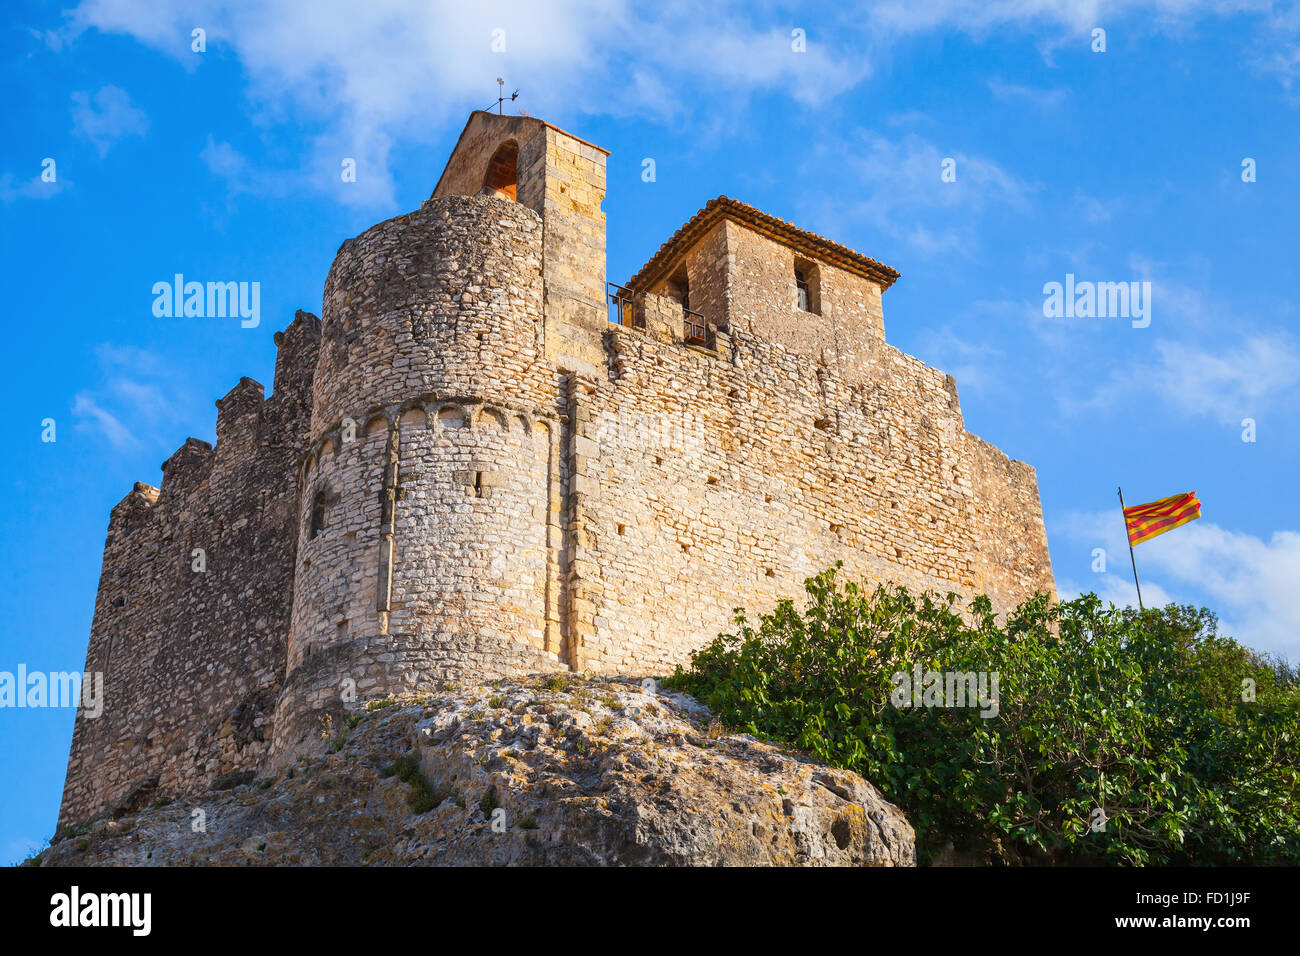 Medieval stone castle and flag of Catalonia on the rock in Spain. Main landmark of Calafell town Stock Photo